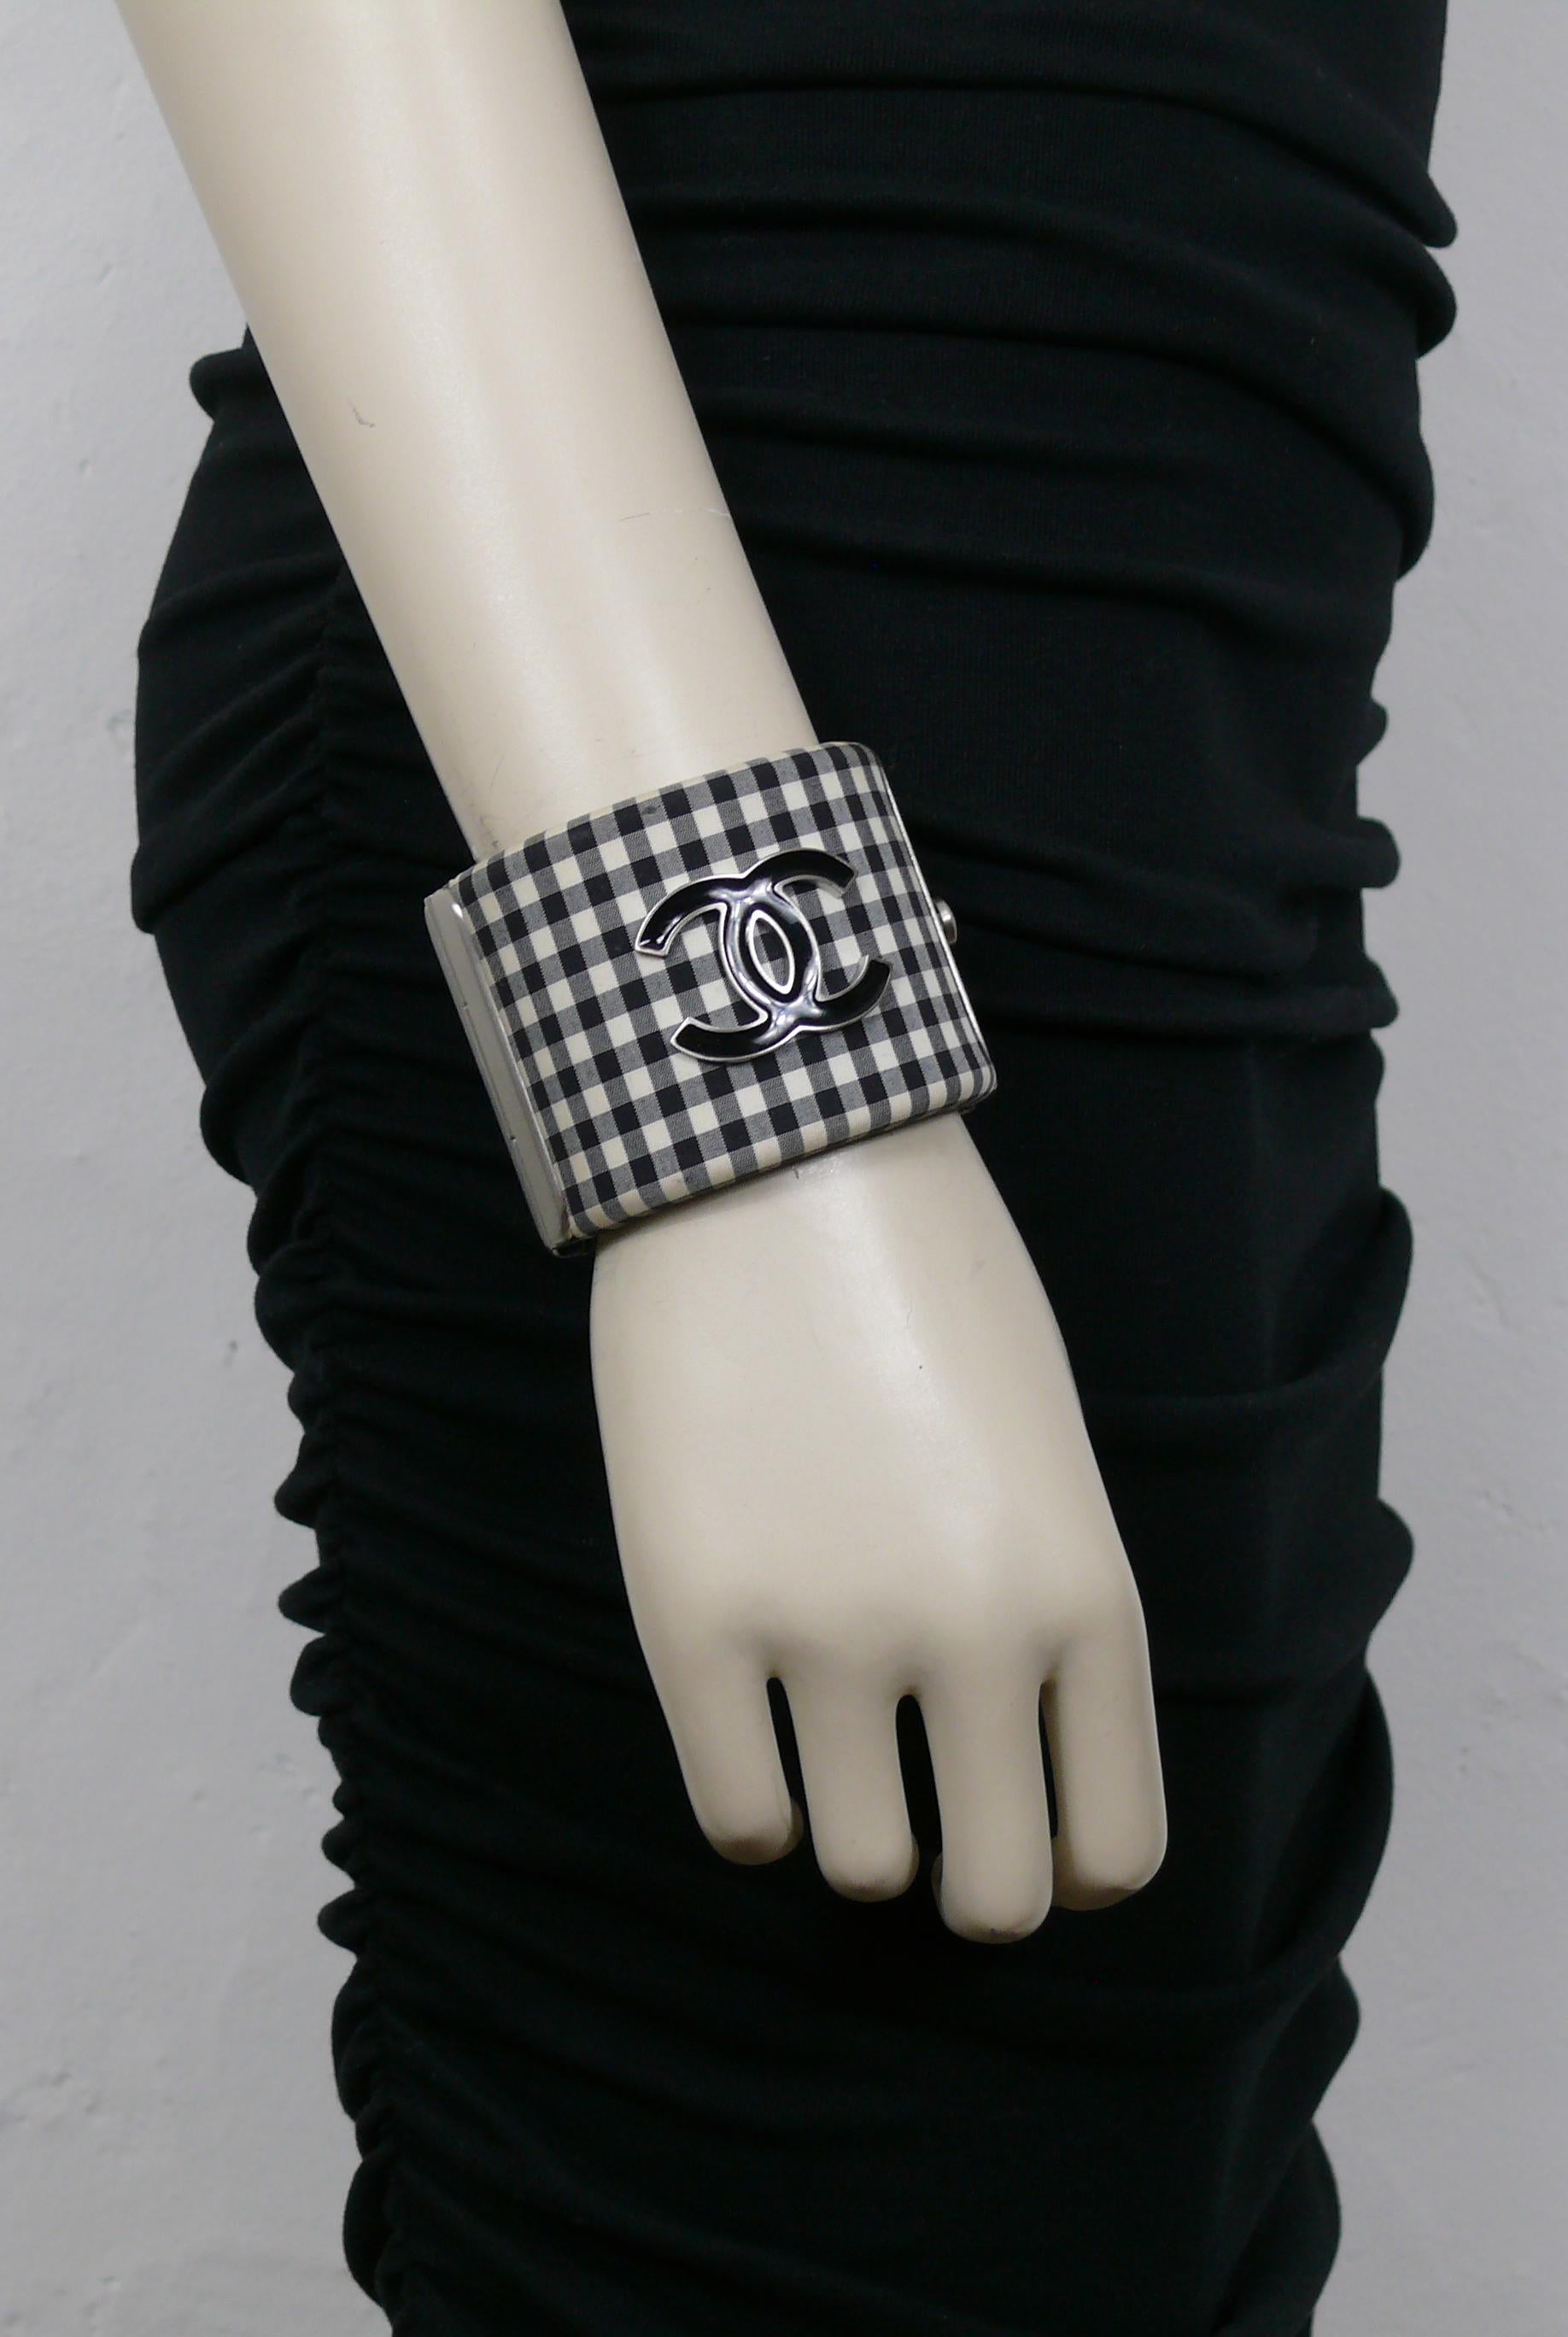 CHANEL by KARL LAGERFELD black and white gingham / vichy print cuff bracelet featuring a silver tone metal and black enamel CC logo at the center.

From the Resort Collection 2011.

Laser mark CHANEL B11 C MADE IN ITALY.

Indicative measurements :